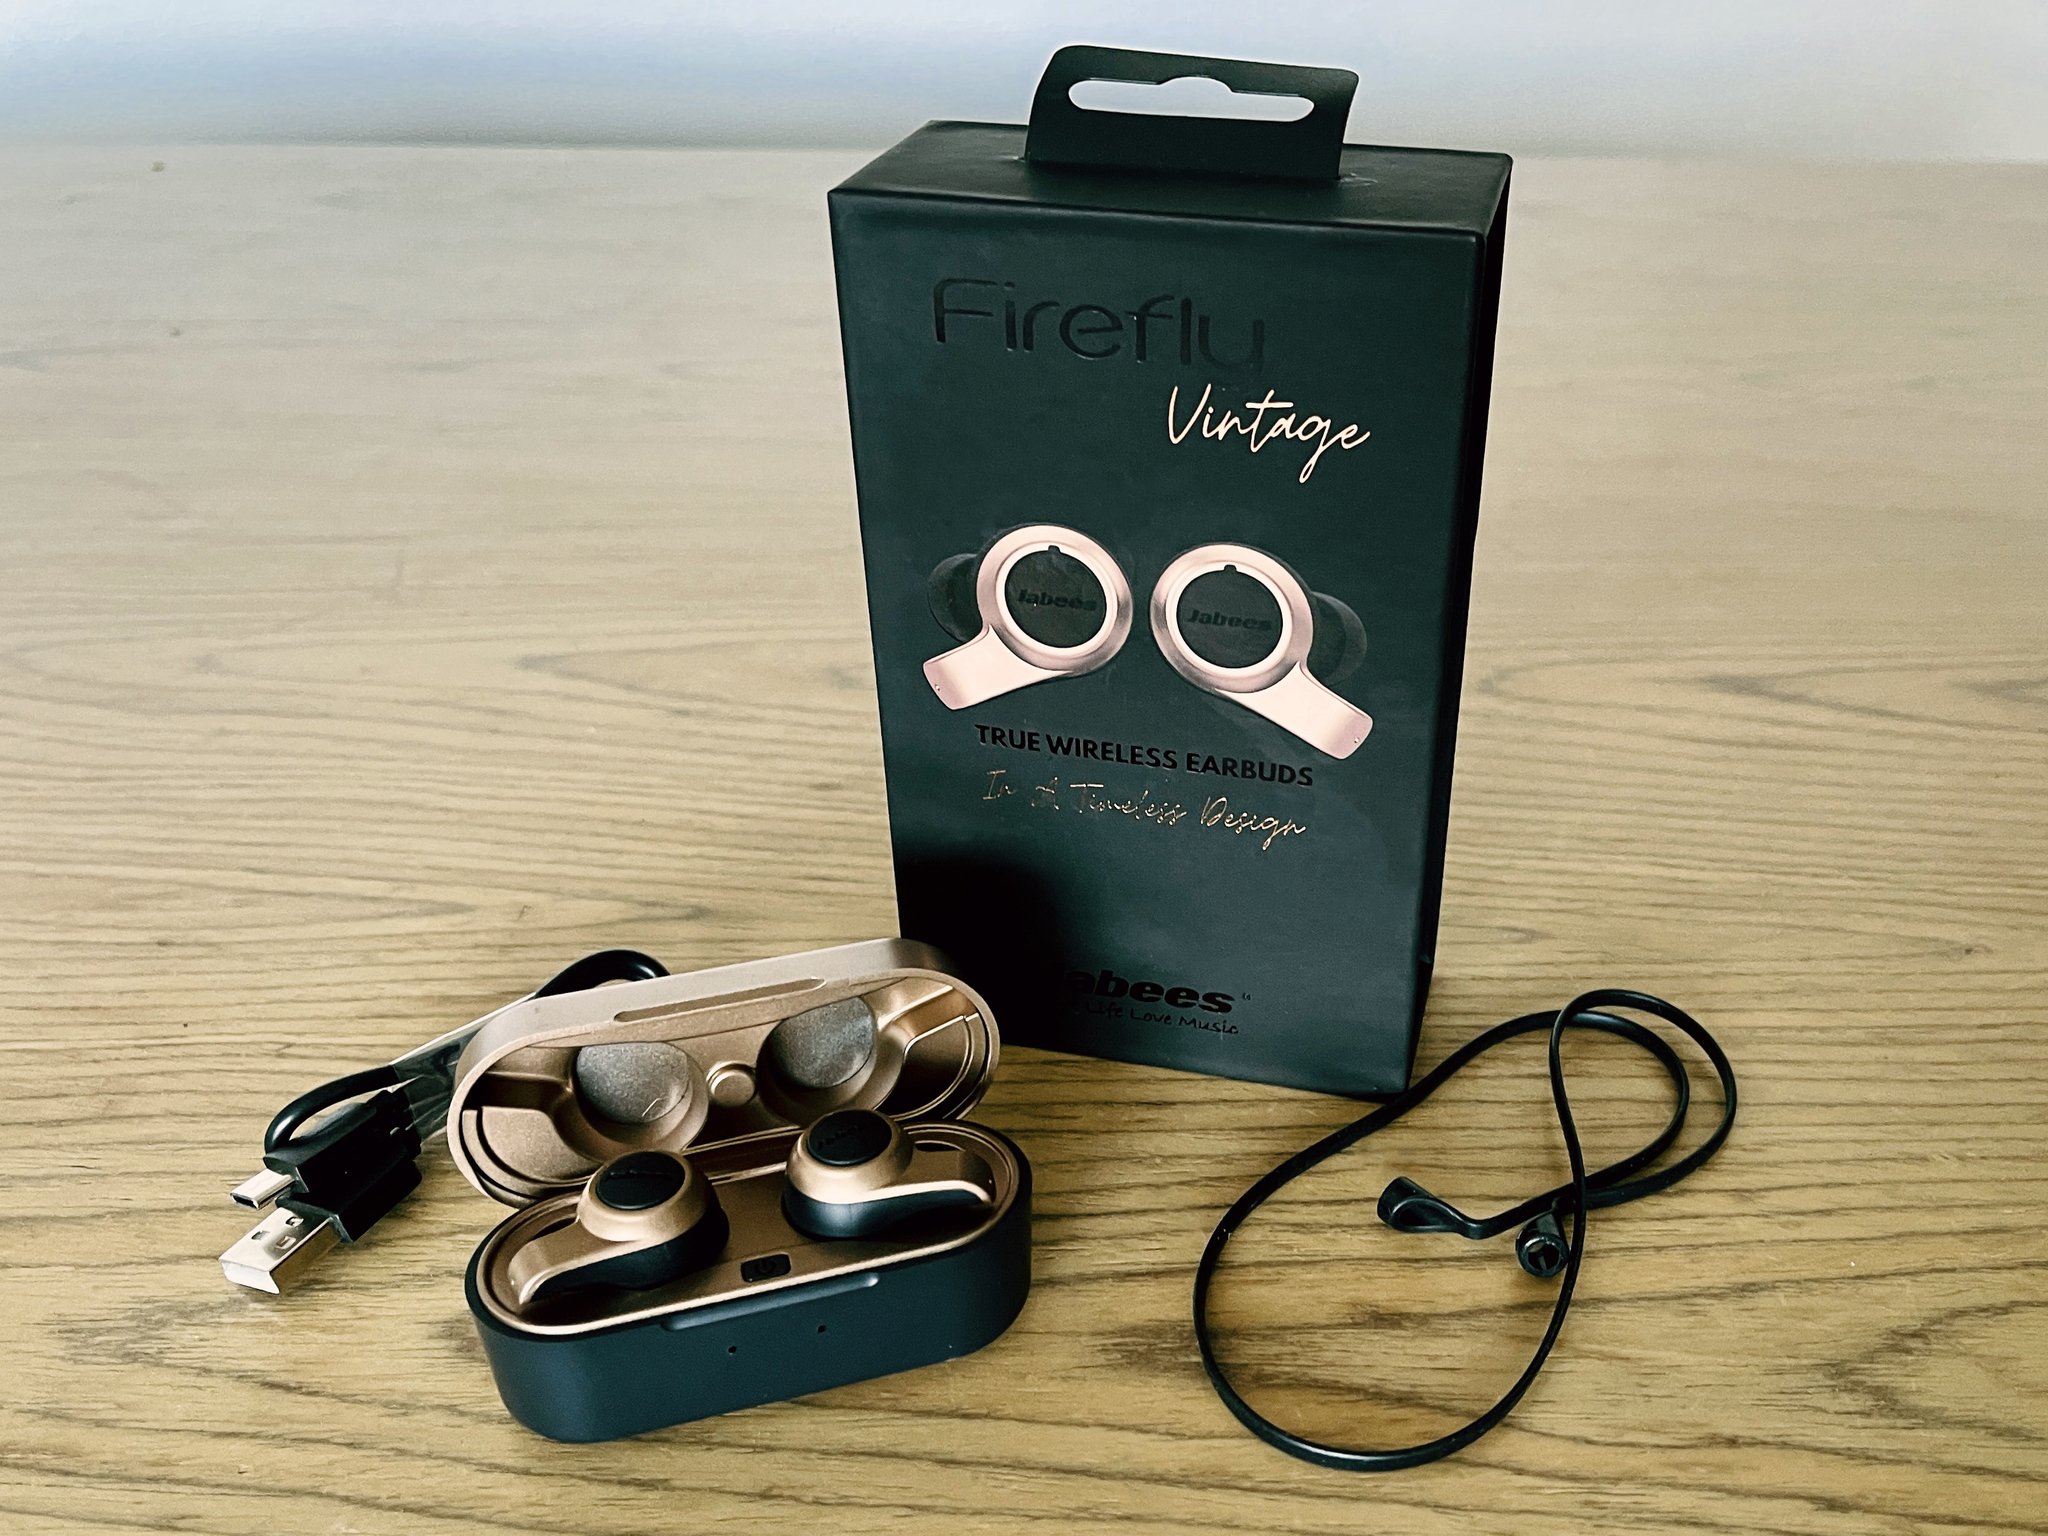 Jabees Firefly Vintage Earbuds